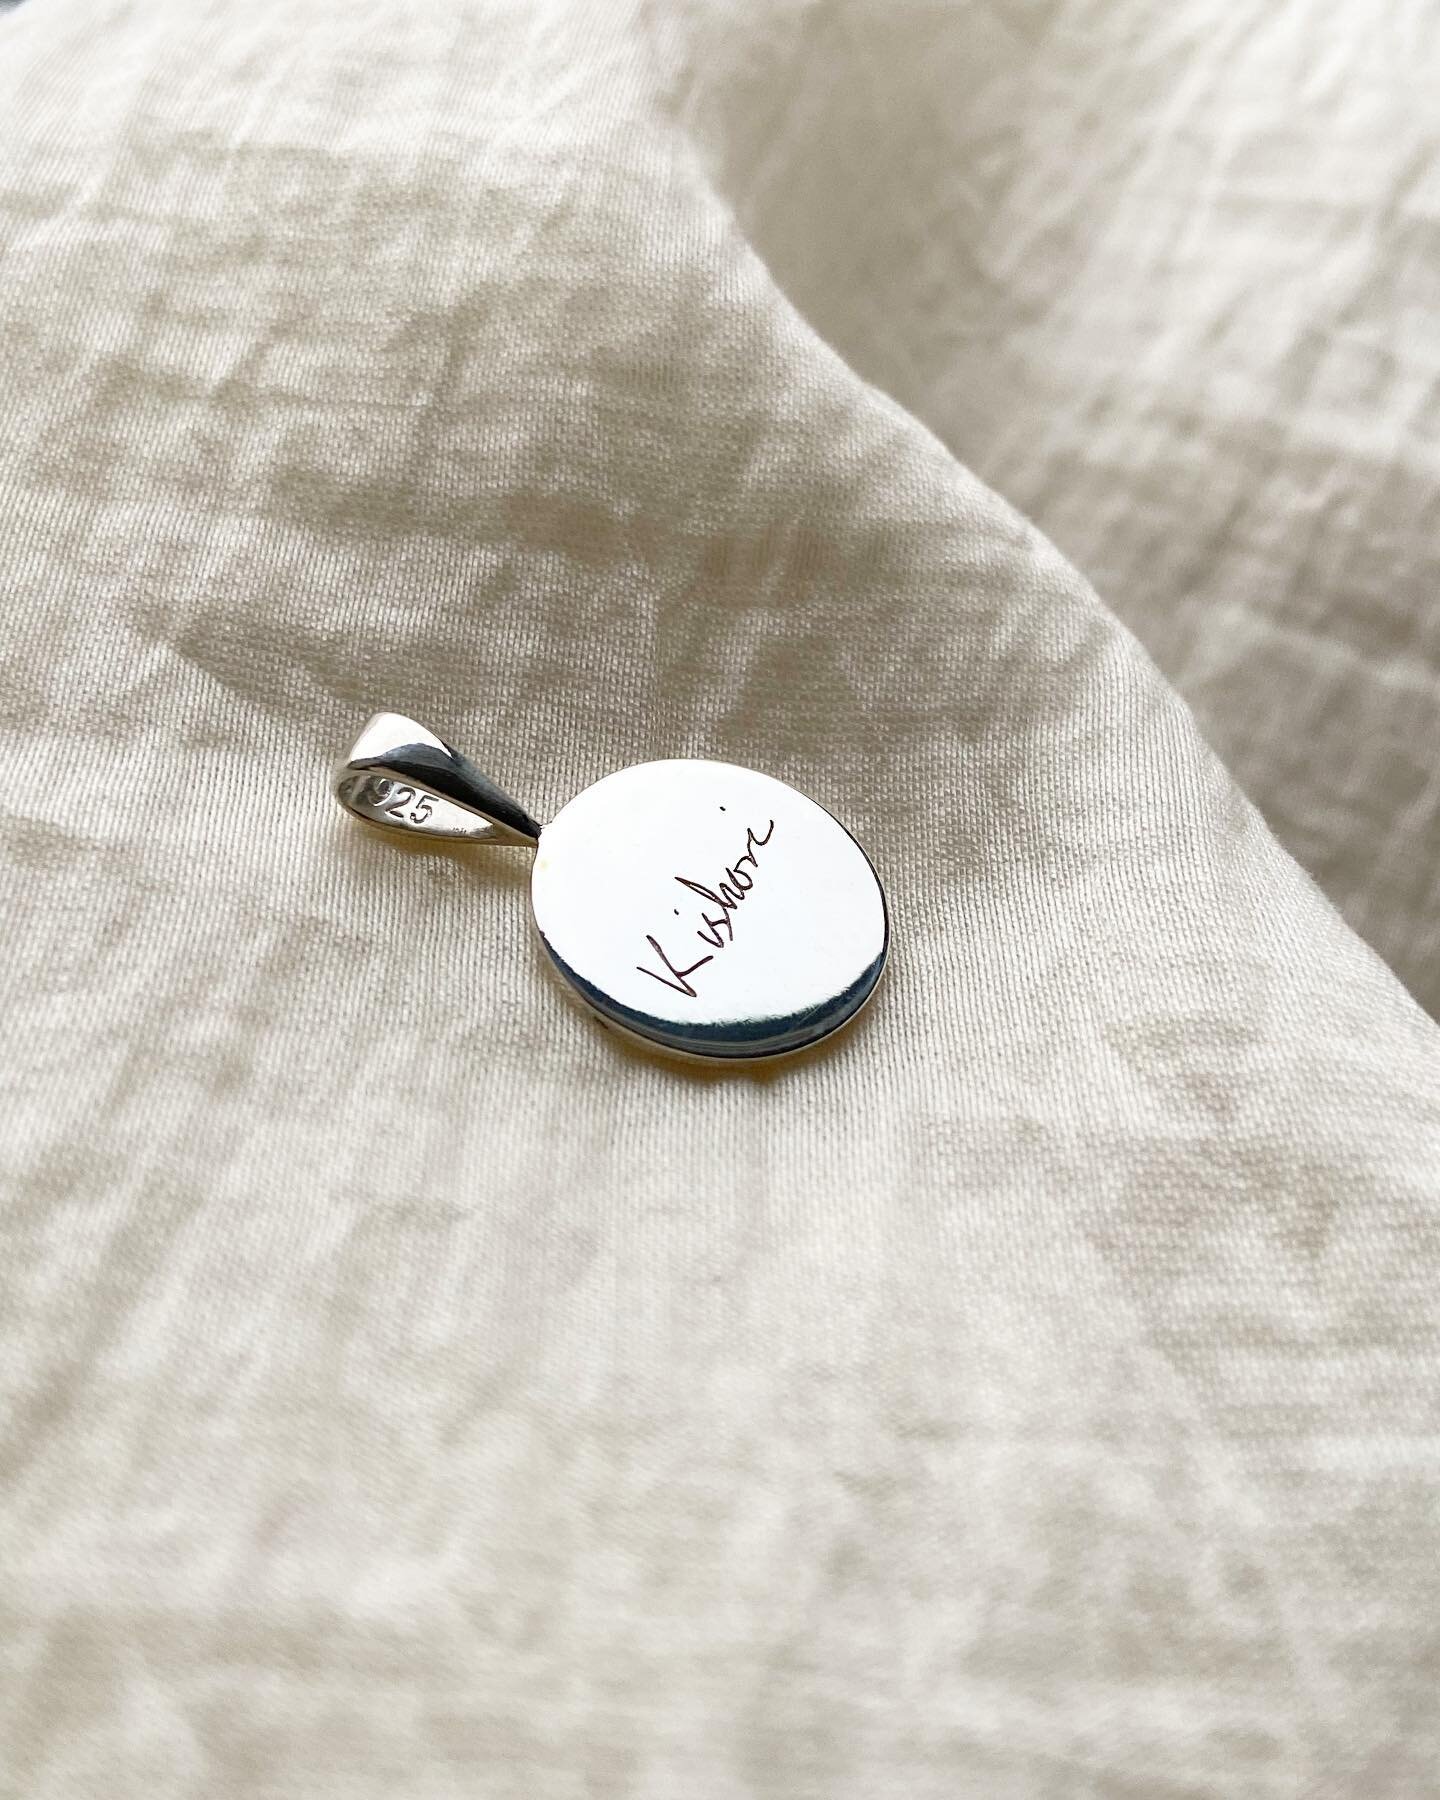 A beautiful handwritten engraving on the solid disc pendant 🤍 

Website updates are on their way and more options to personalise these pendants will be available soon! In the meantime, please get in touch if you&rsquo;d like to personalise these sim